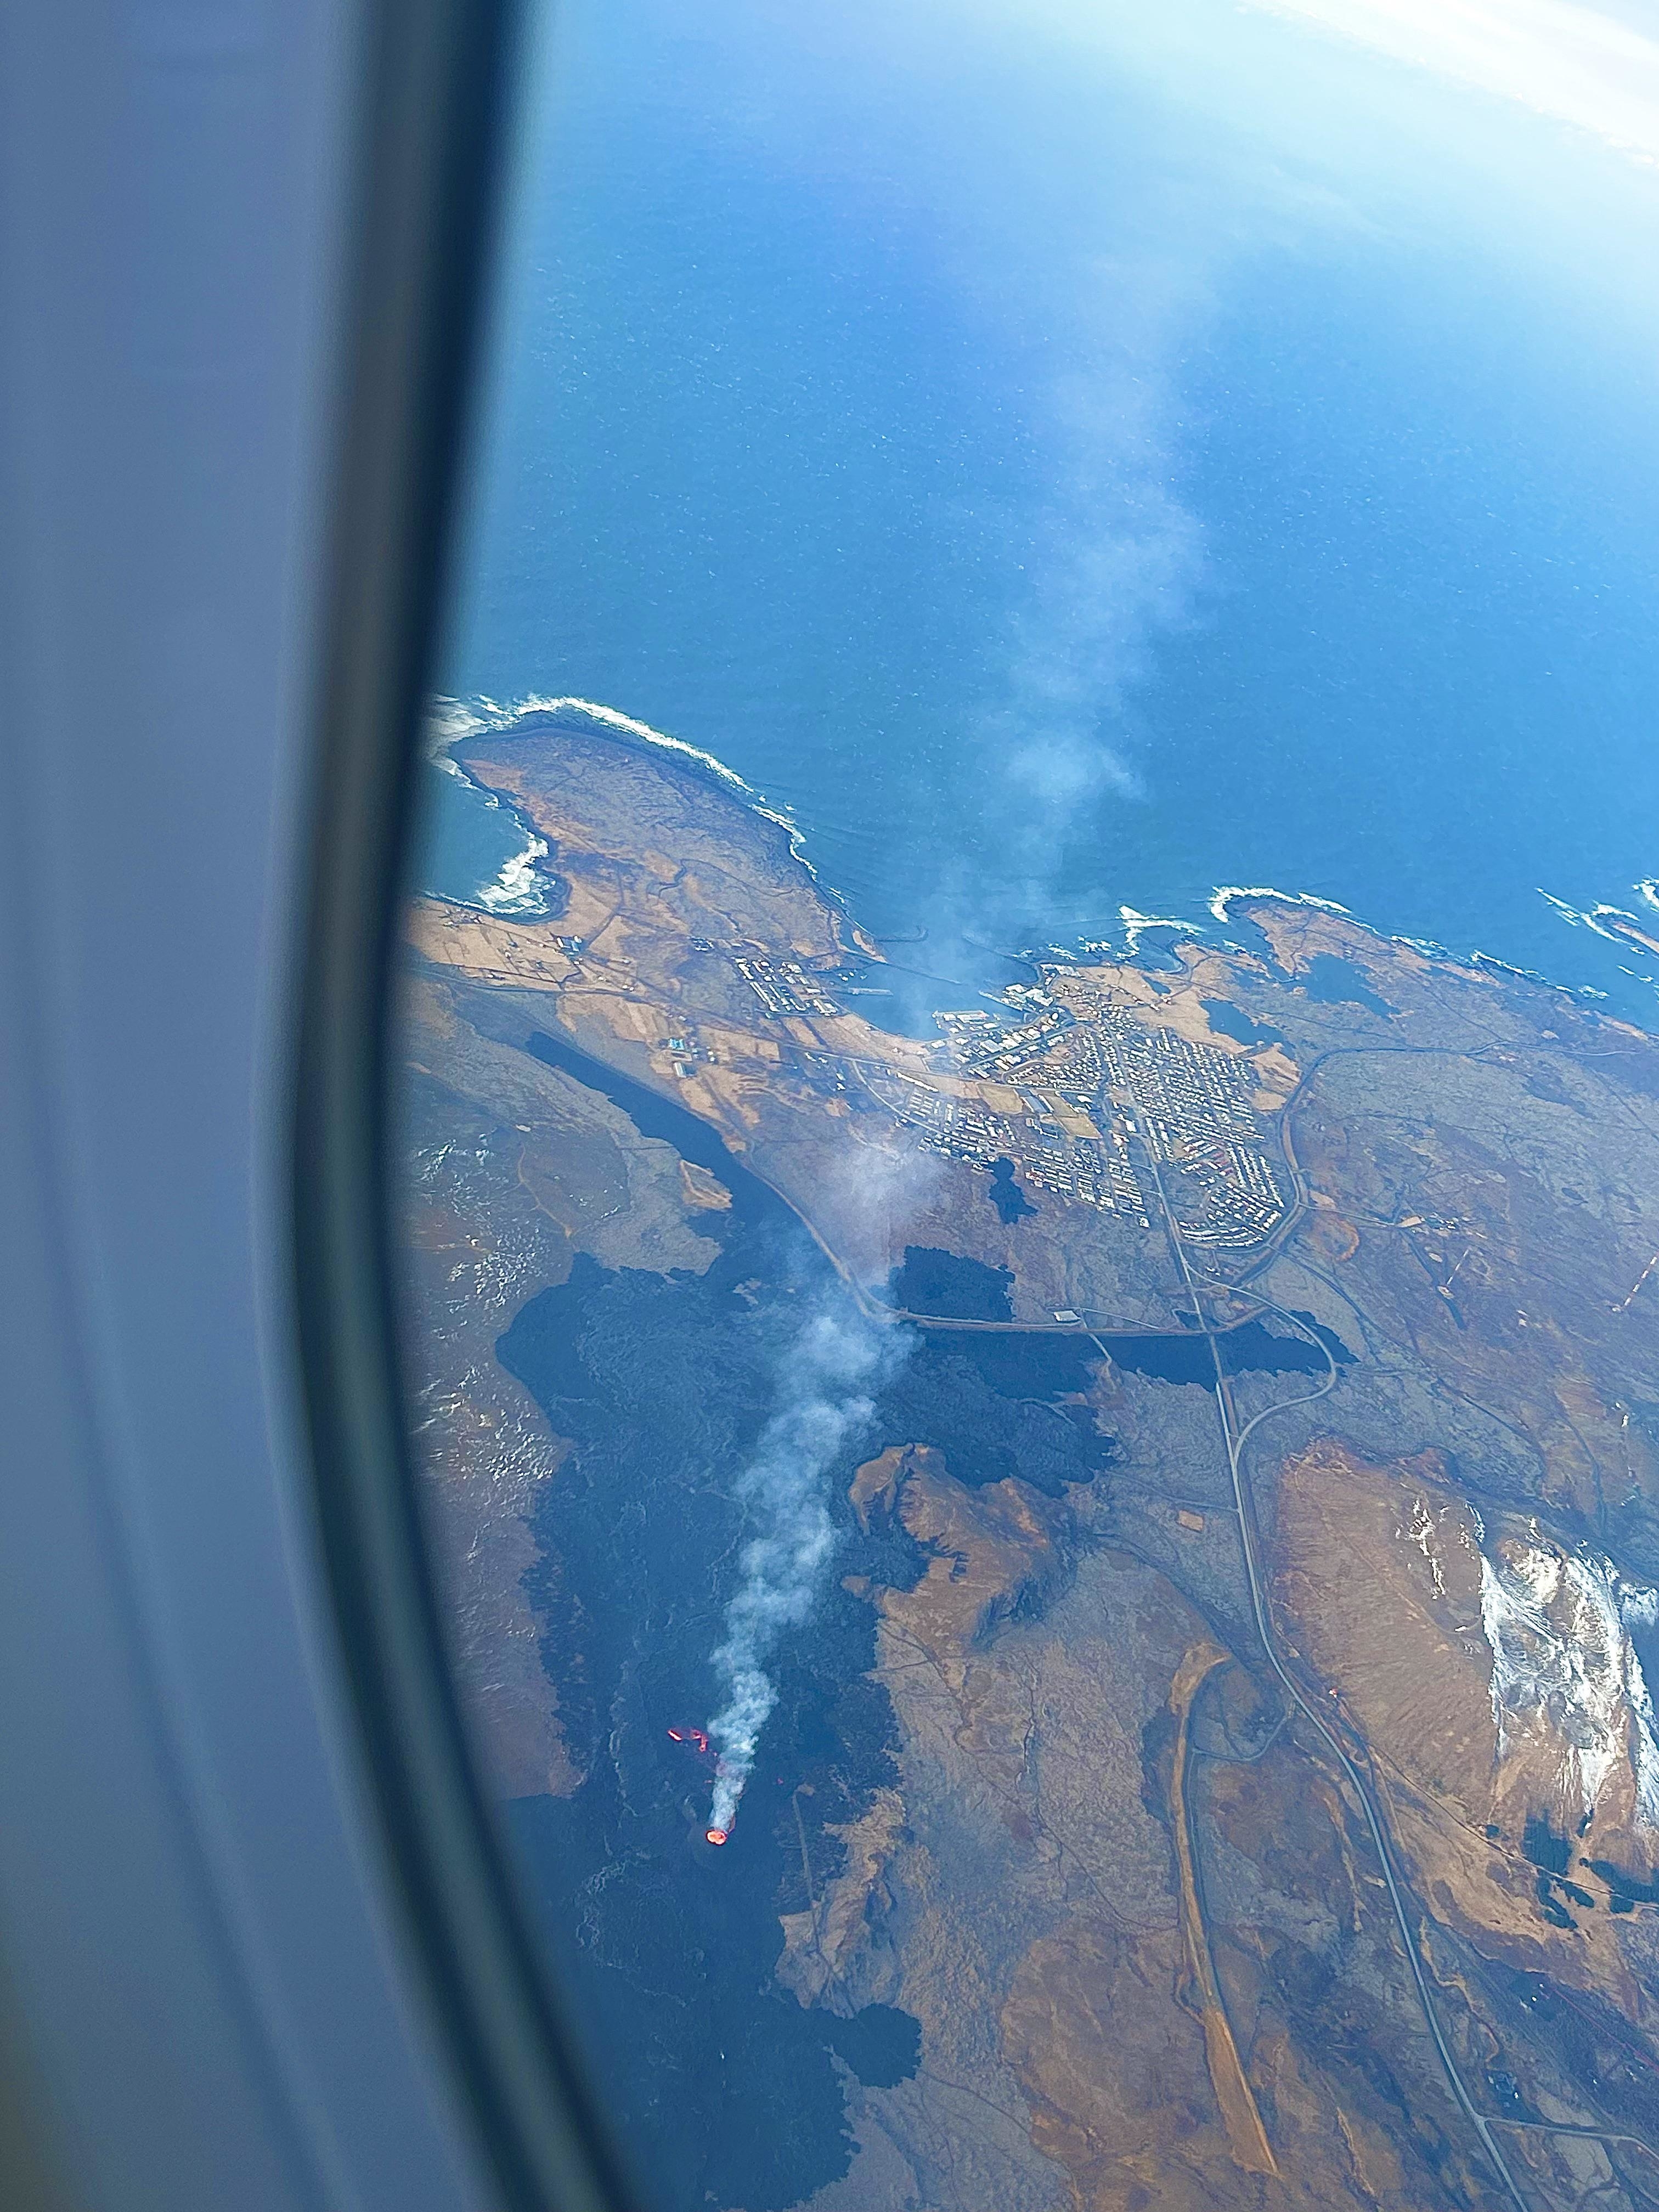 Aerial view of a coastline and a smoke plume from a fire, seen through an airplane window